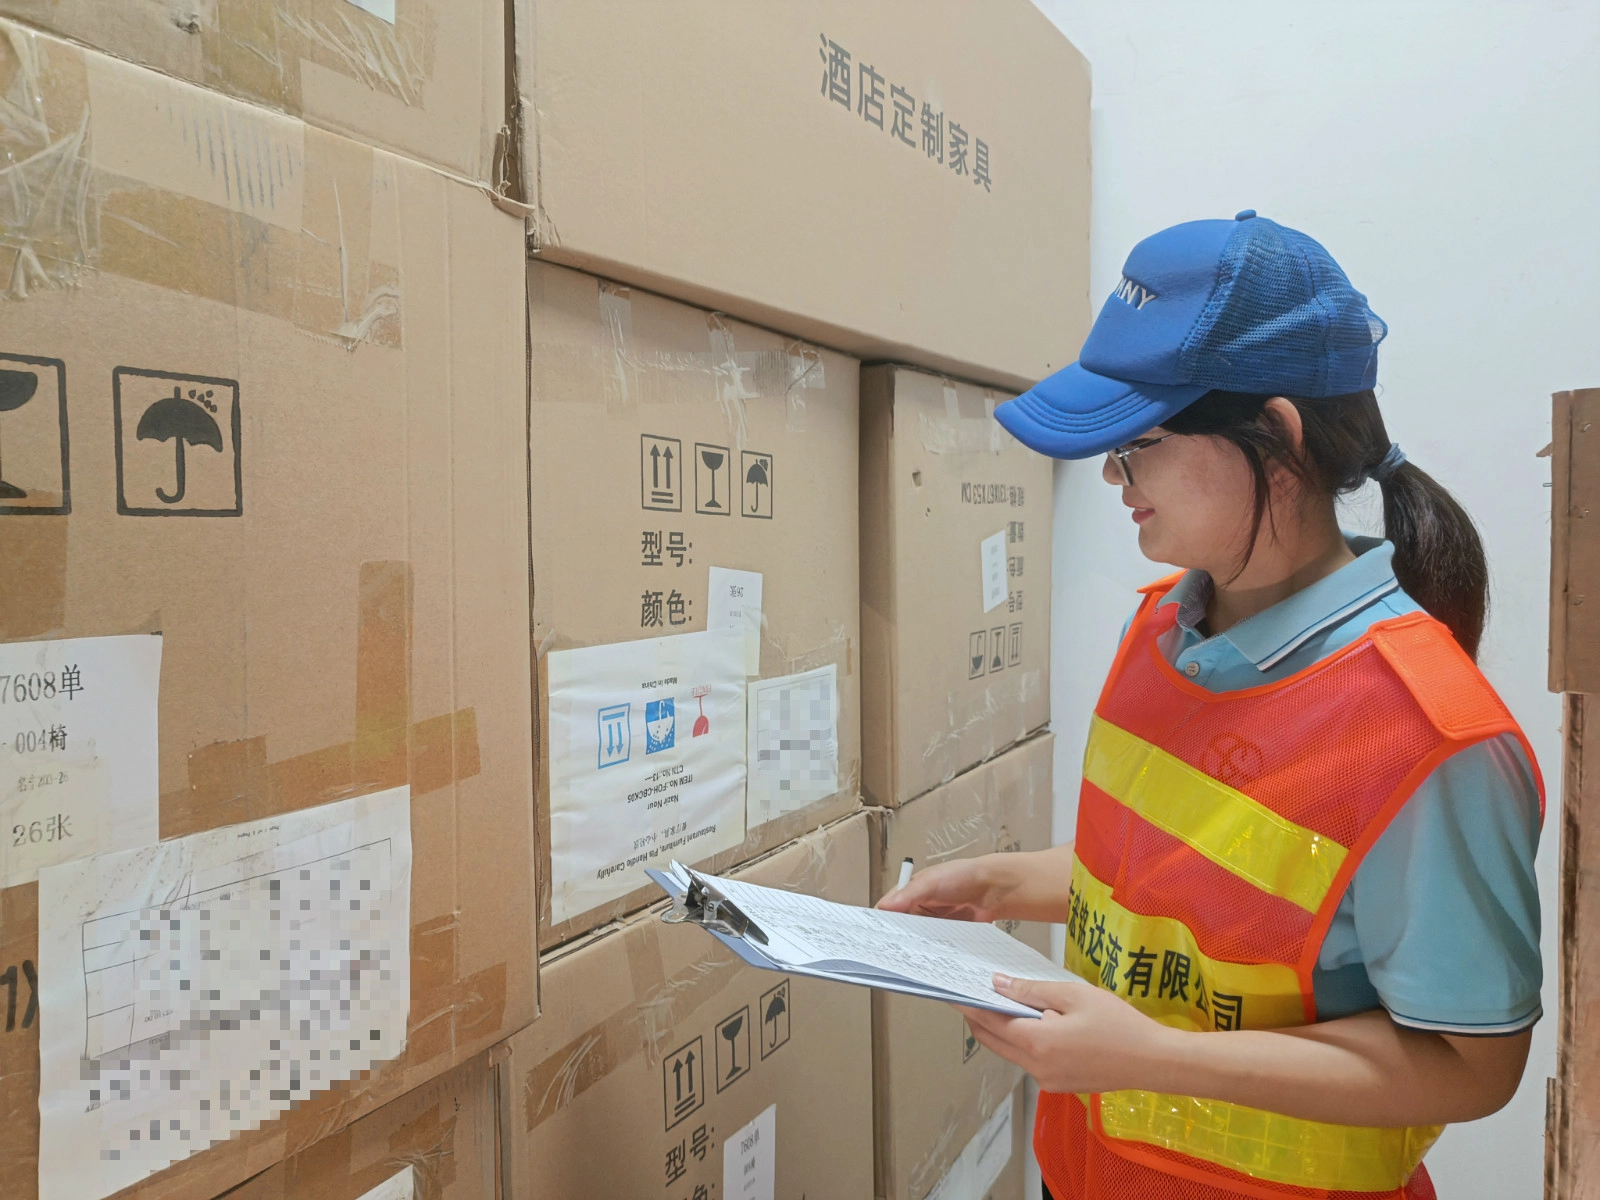 Cheap door to door shipping service from China to Philippines sea freight cargo, Sunny Worldwide Logistics